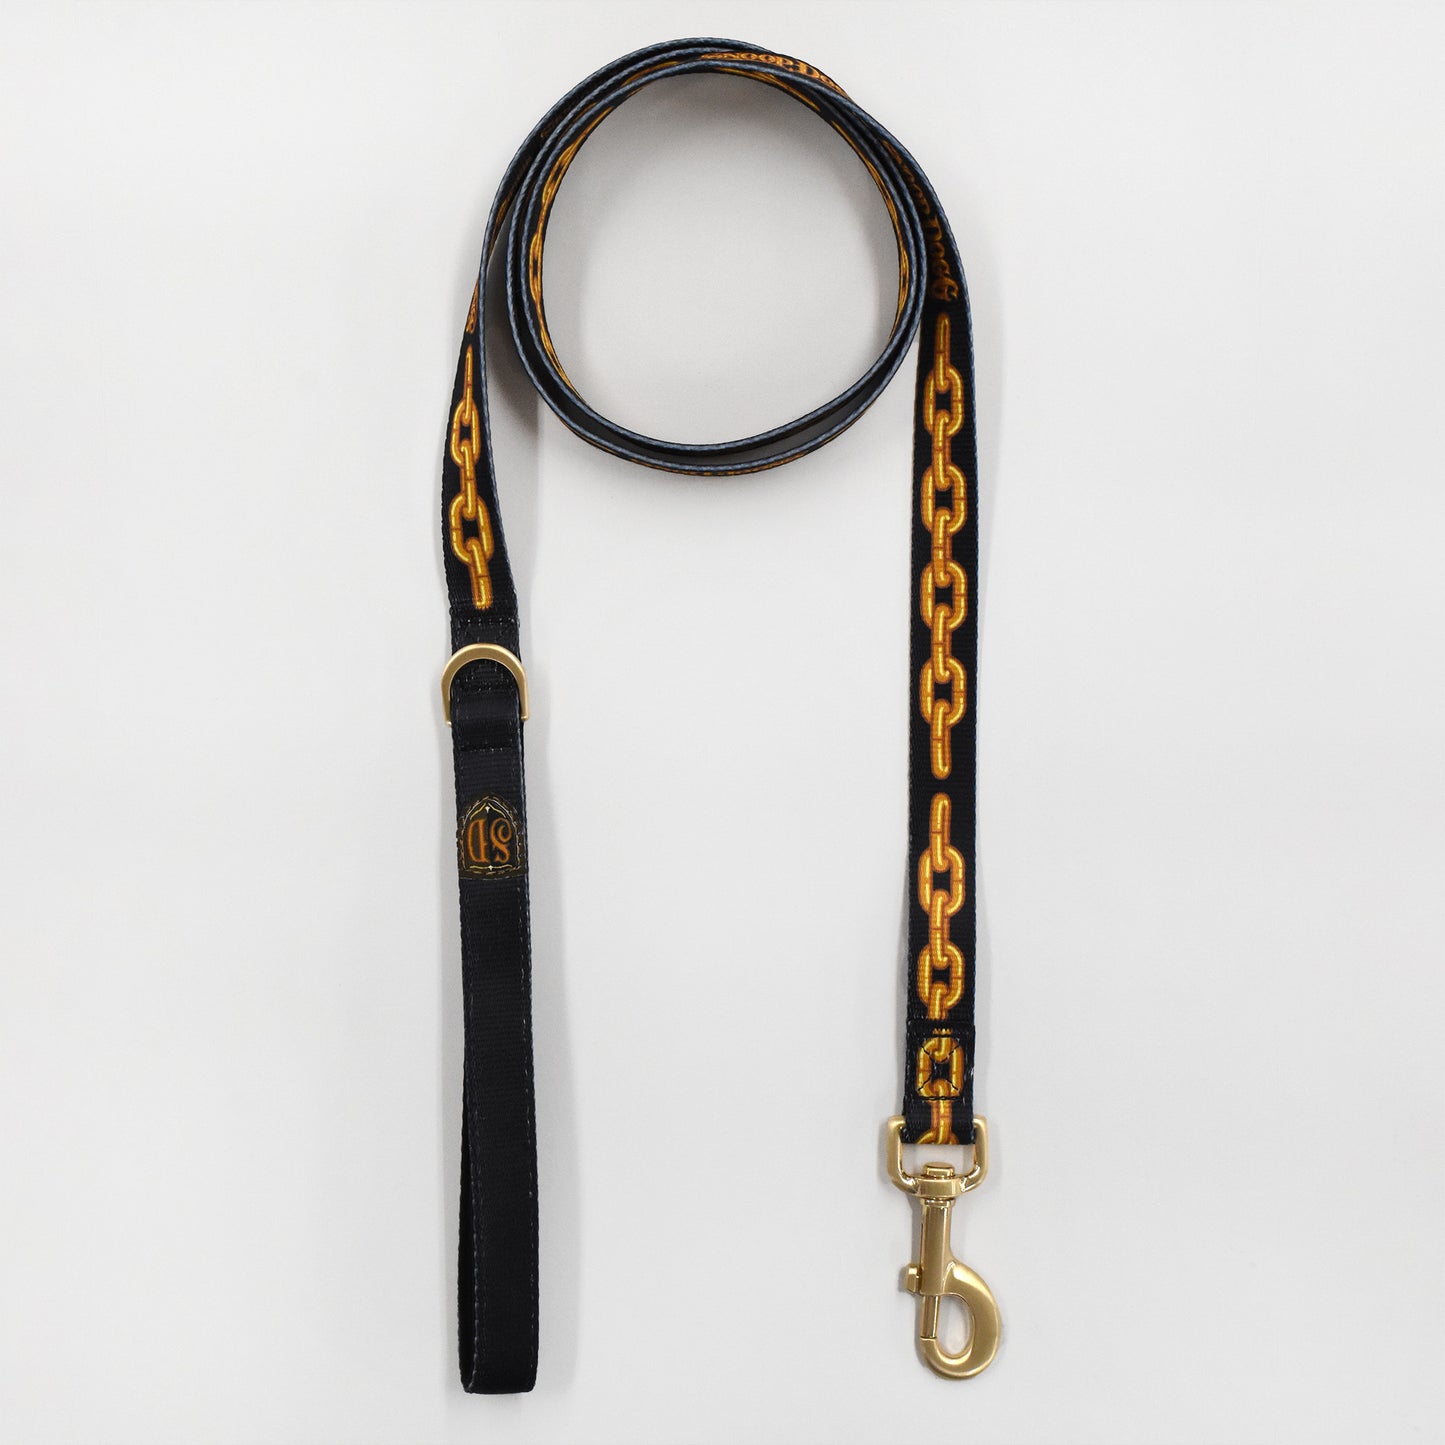 Product flat lay of the Off The Chain Deluxe Pet Lead.